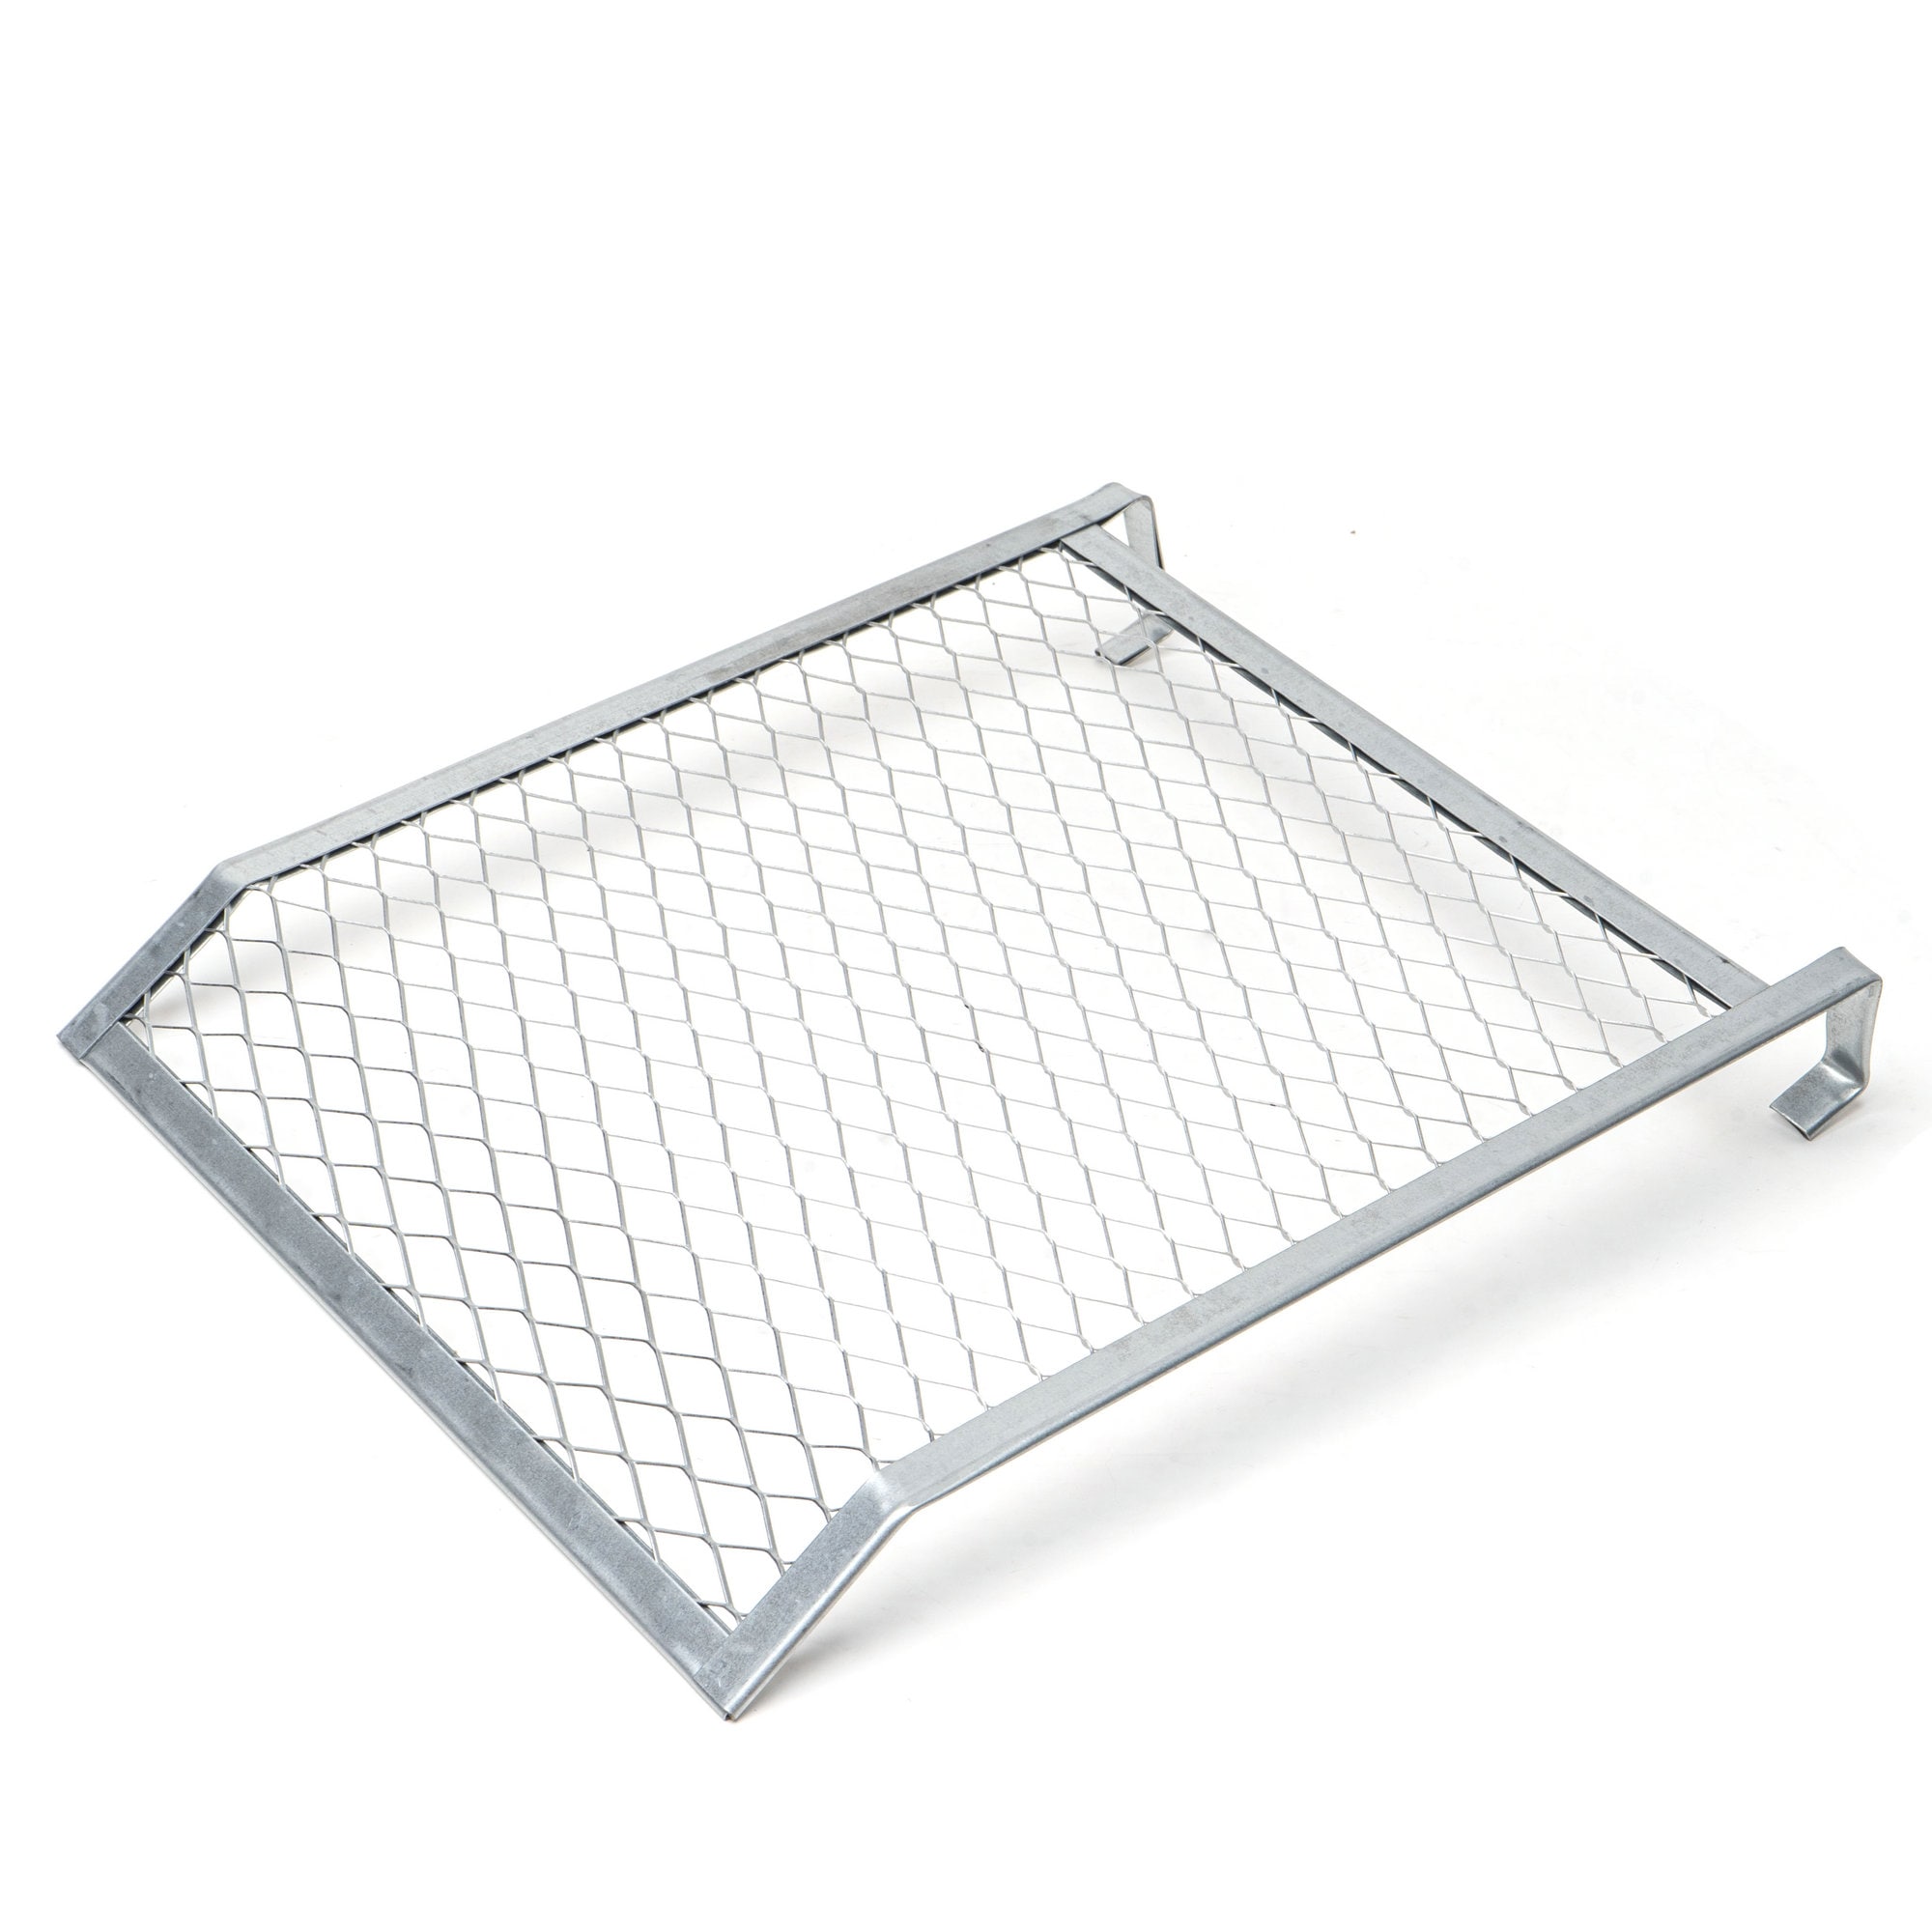 Metal Paint Trays & Liners at